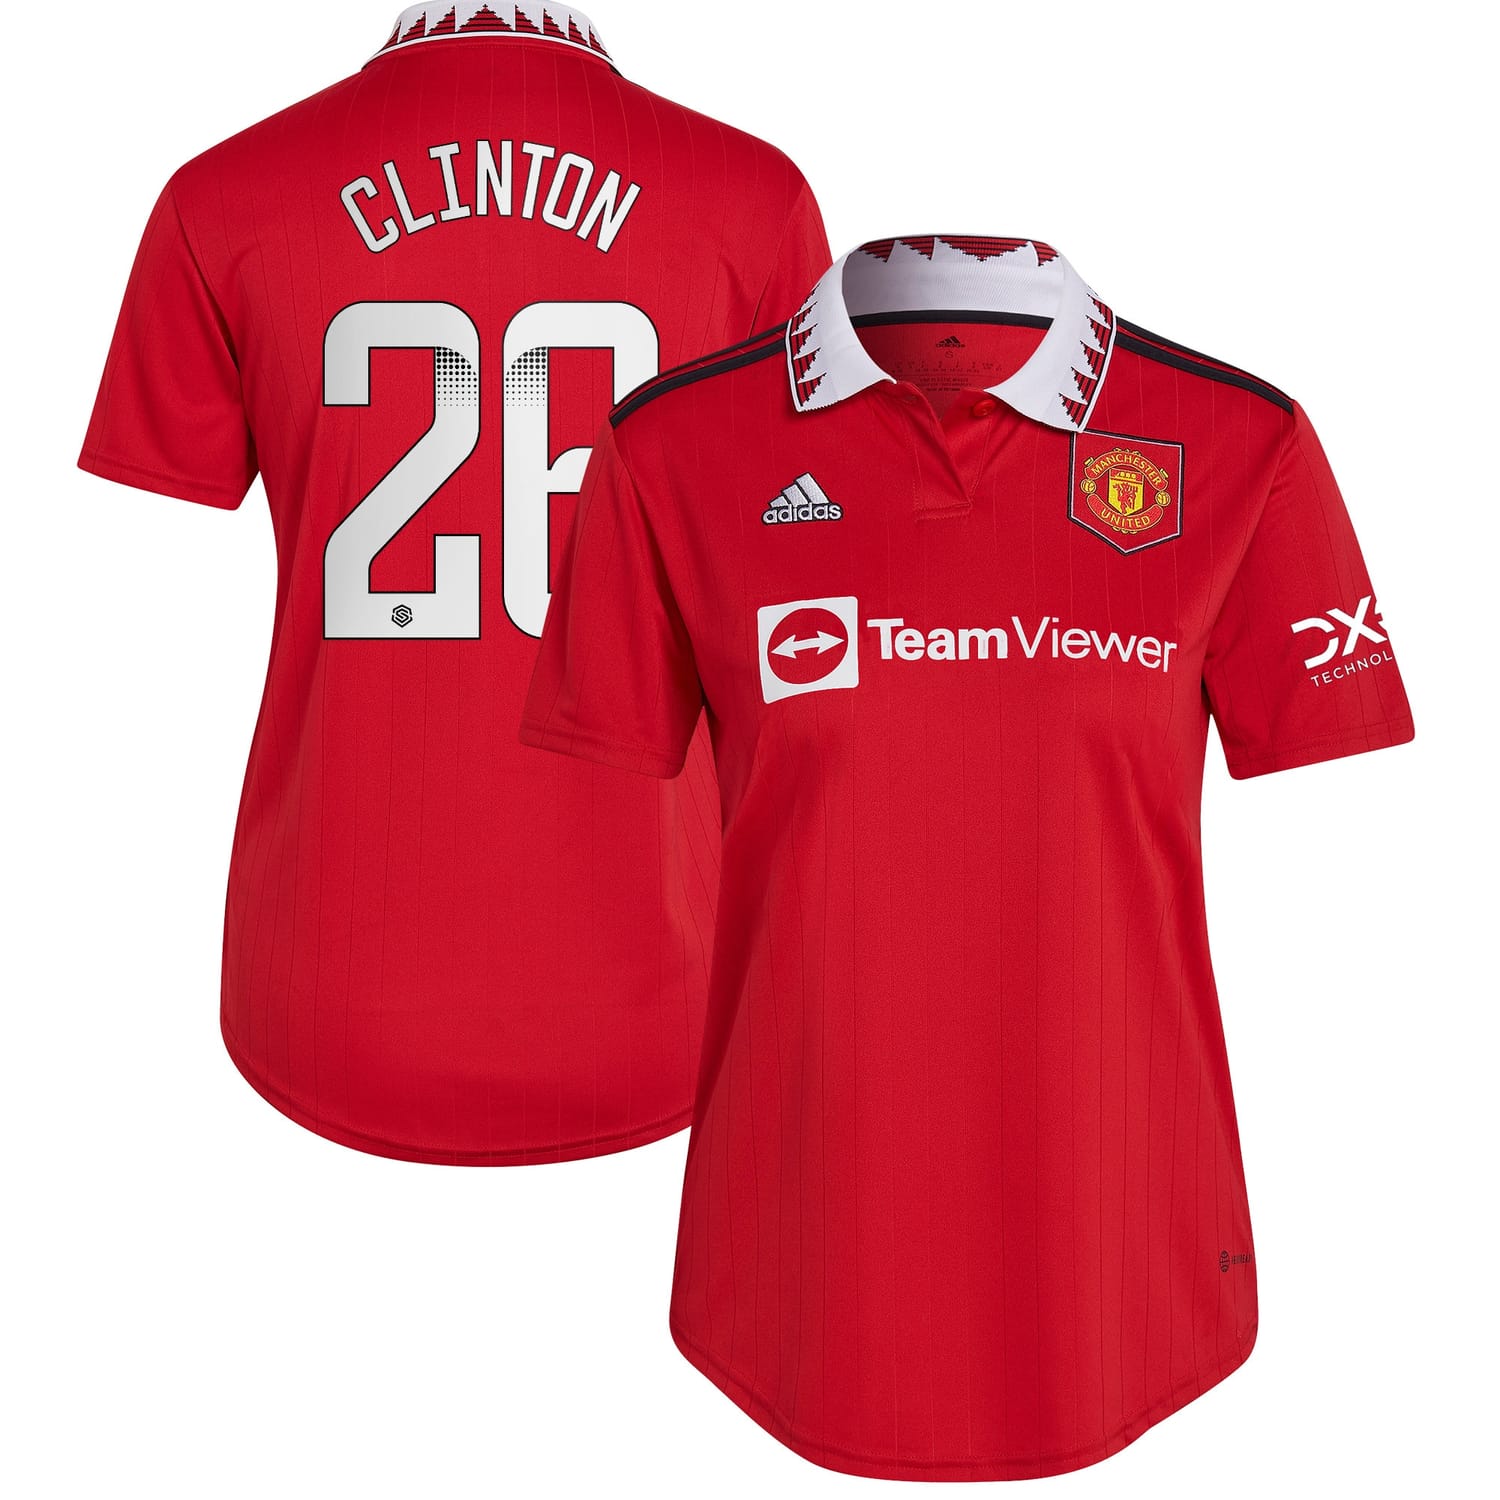 Premier League Manchester United Home WSL Jersey Shirt 2022-23 player Grace Clinton 26 printing for Women